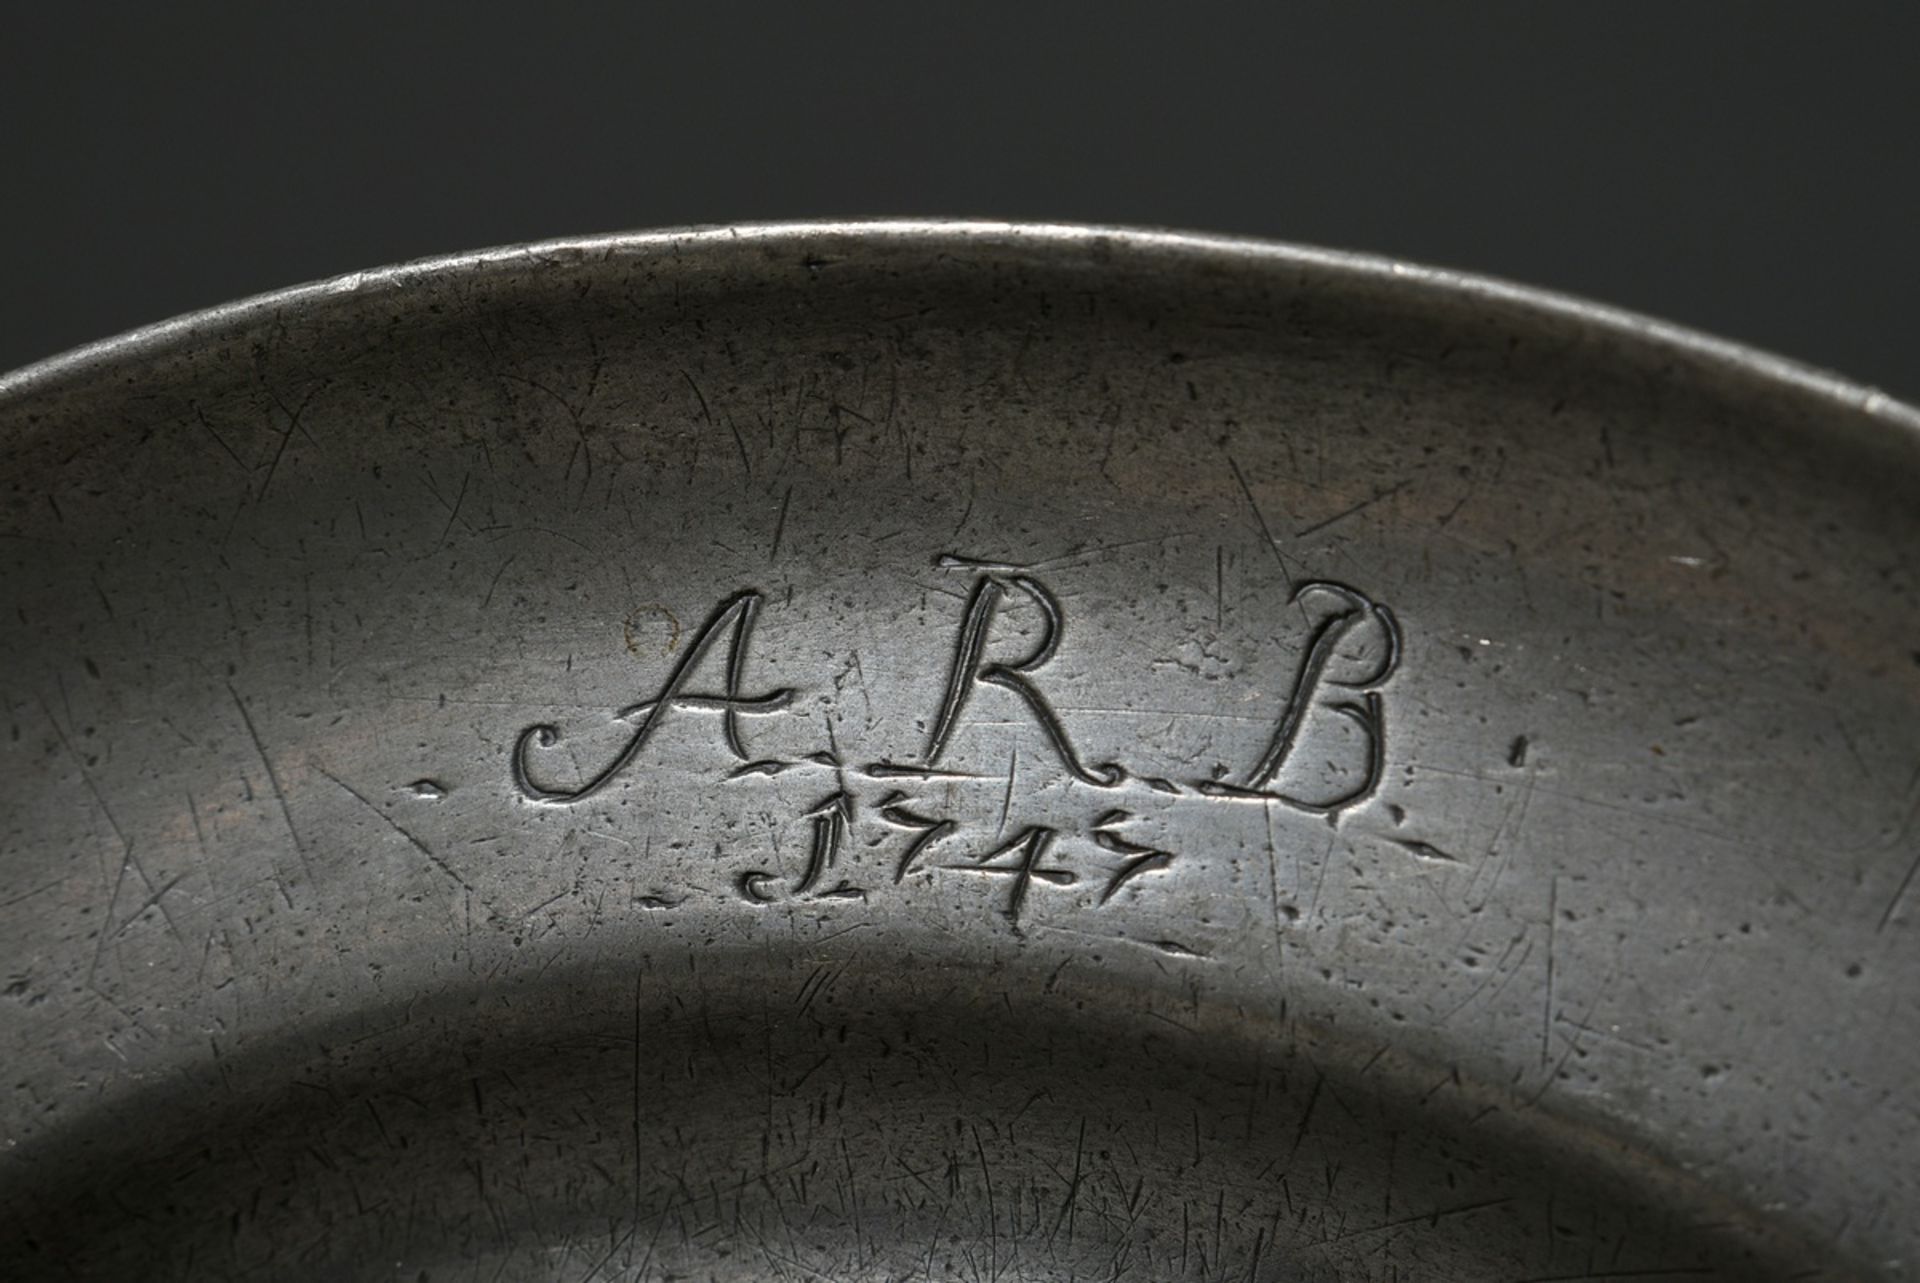 3 Various small pewter plates with engraved date "1747" and different monograms "C.F.R"/"A.R.B" and - Image 6 of 11